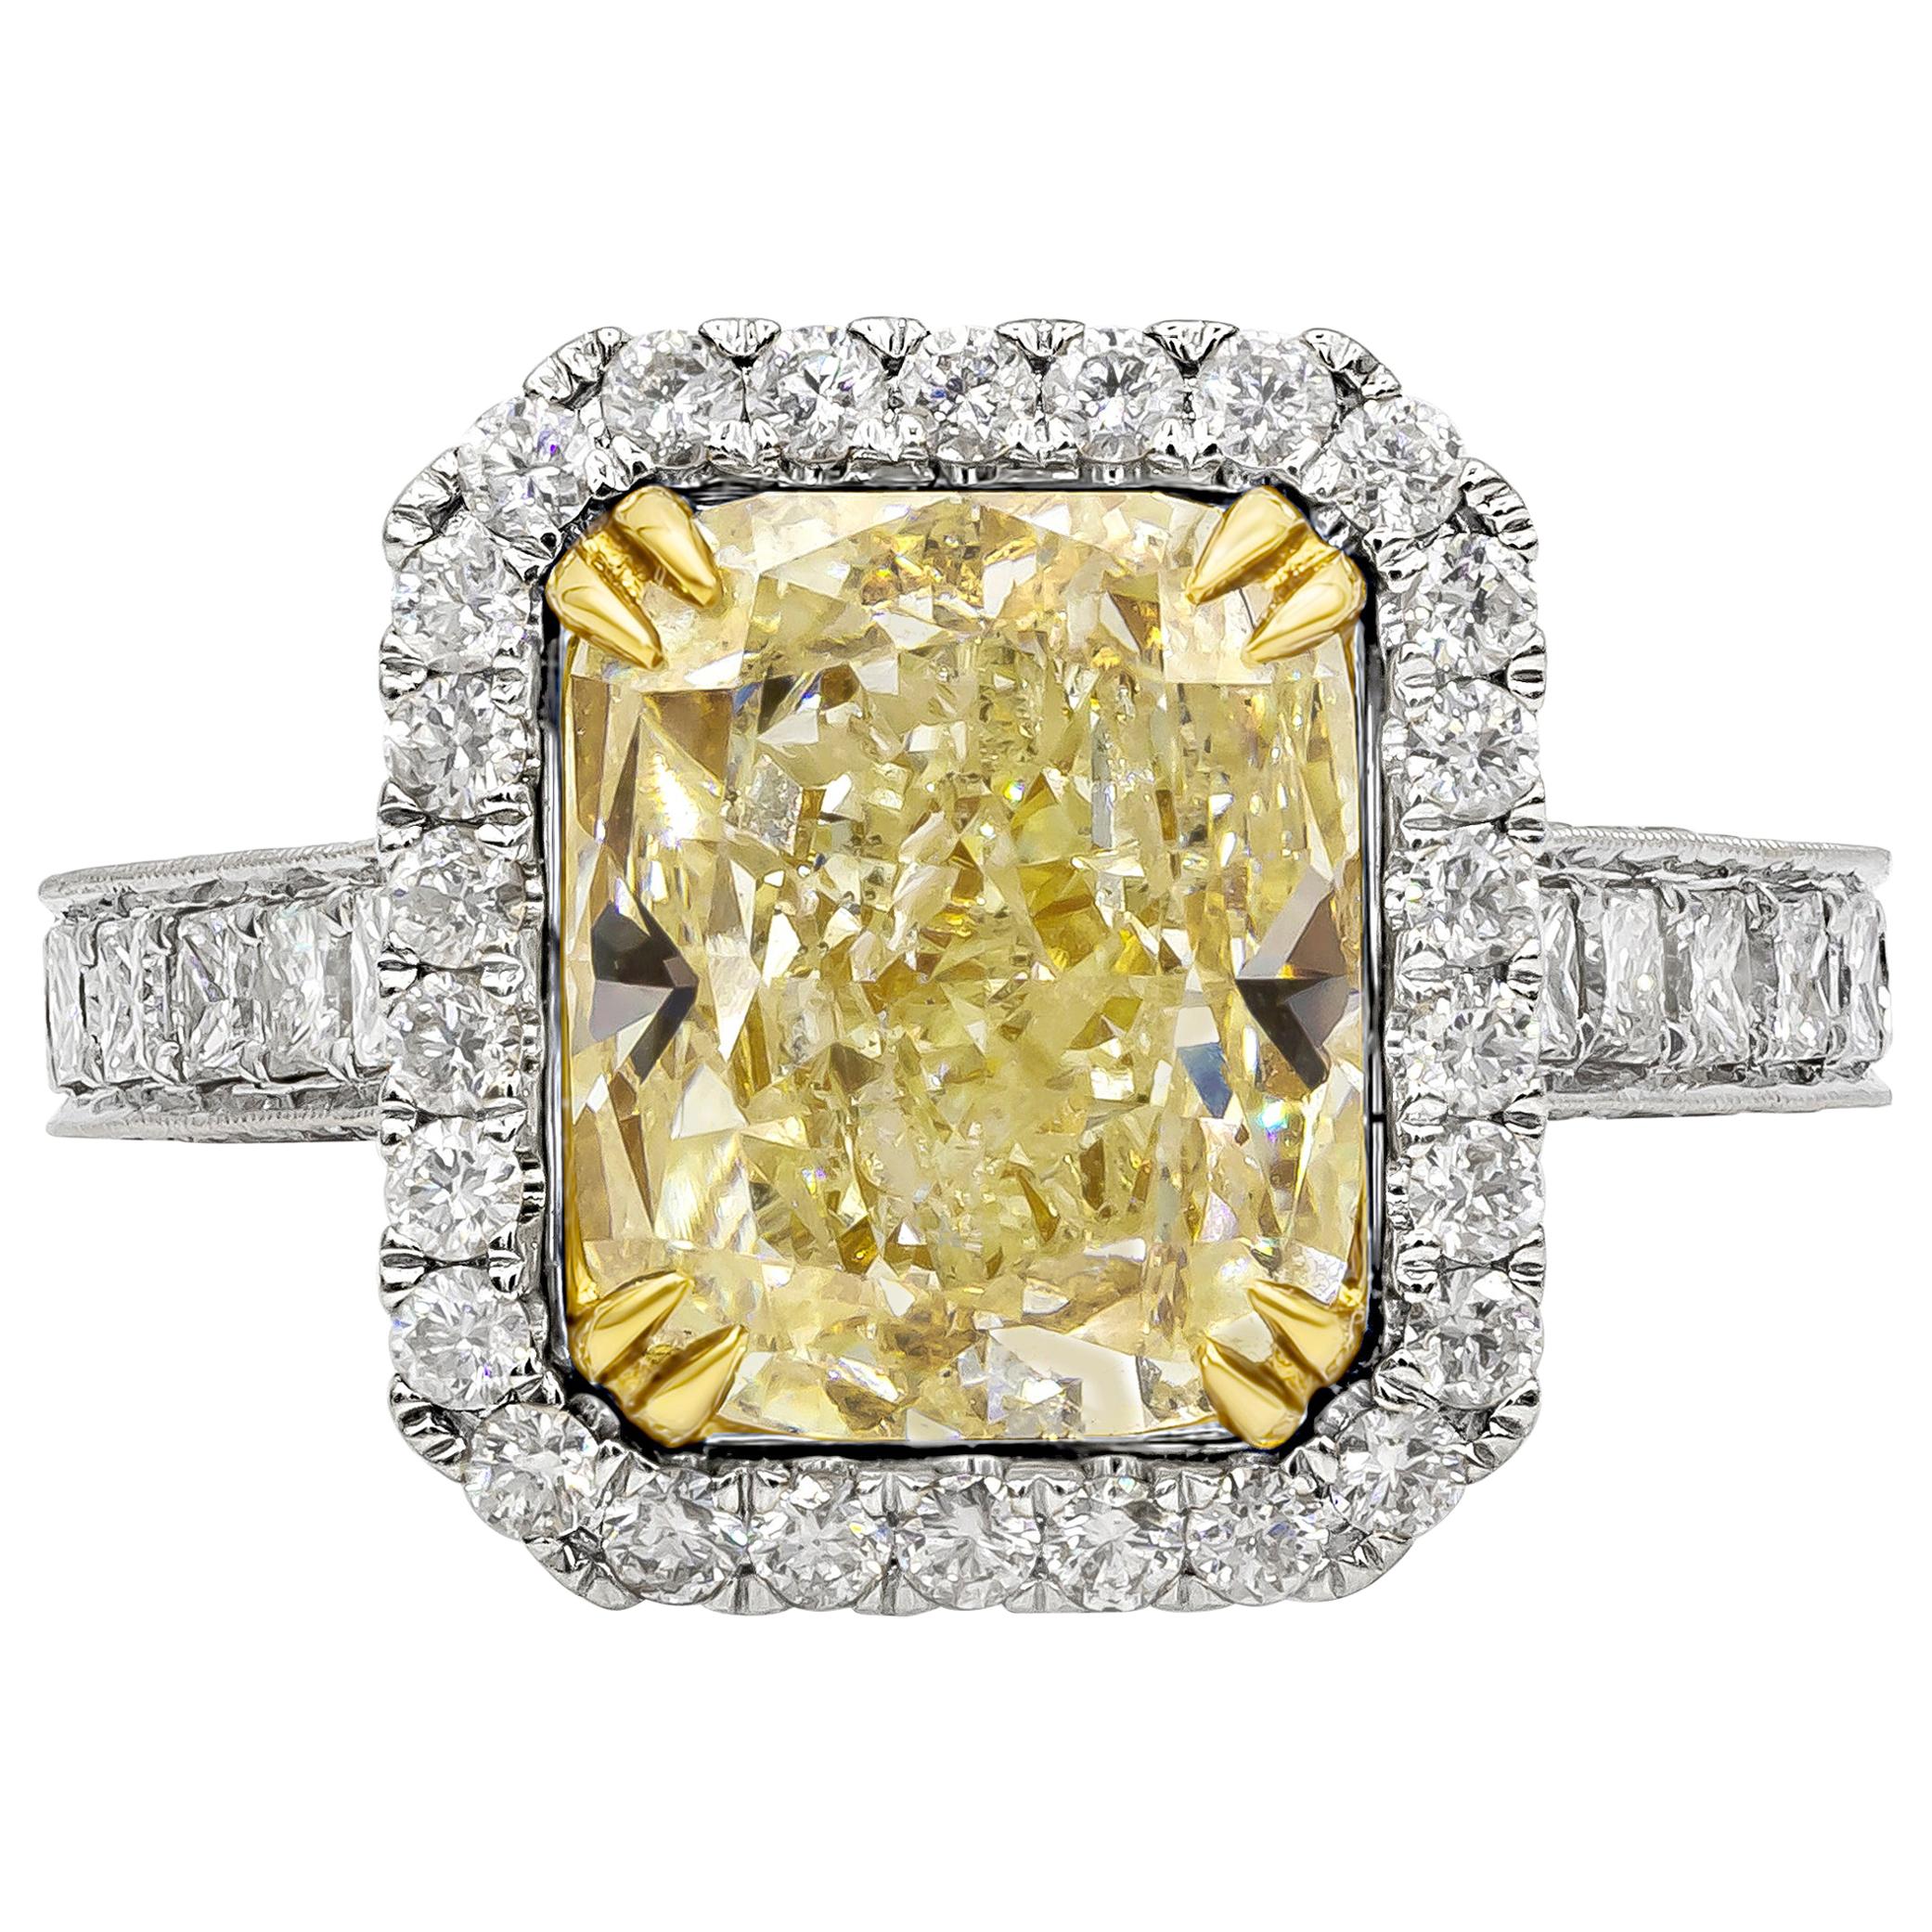 EGL USA Certified 5.07 Carats Cushion Cut Yellow Diamond Halo Engagement Ring For Sale